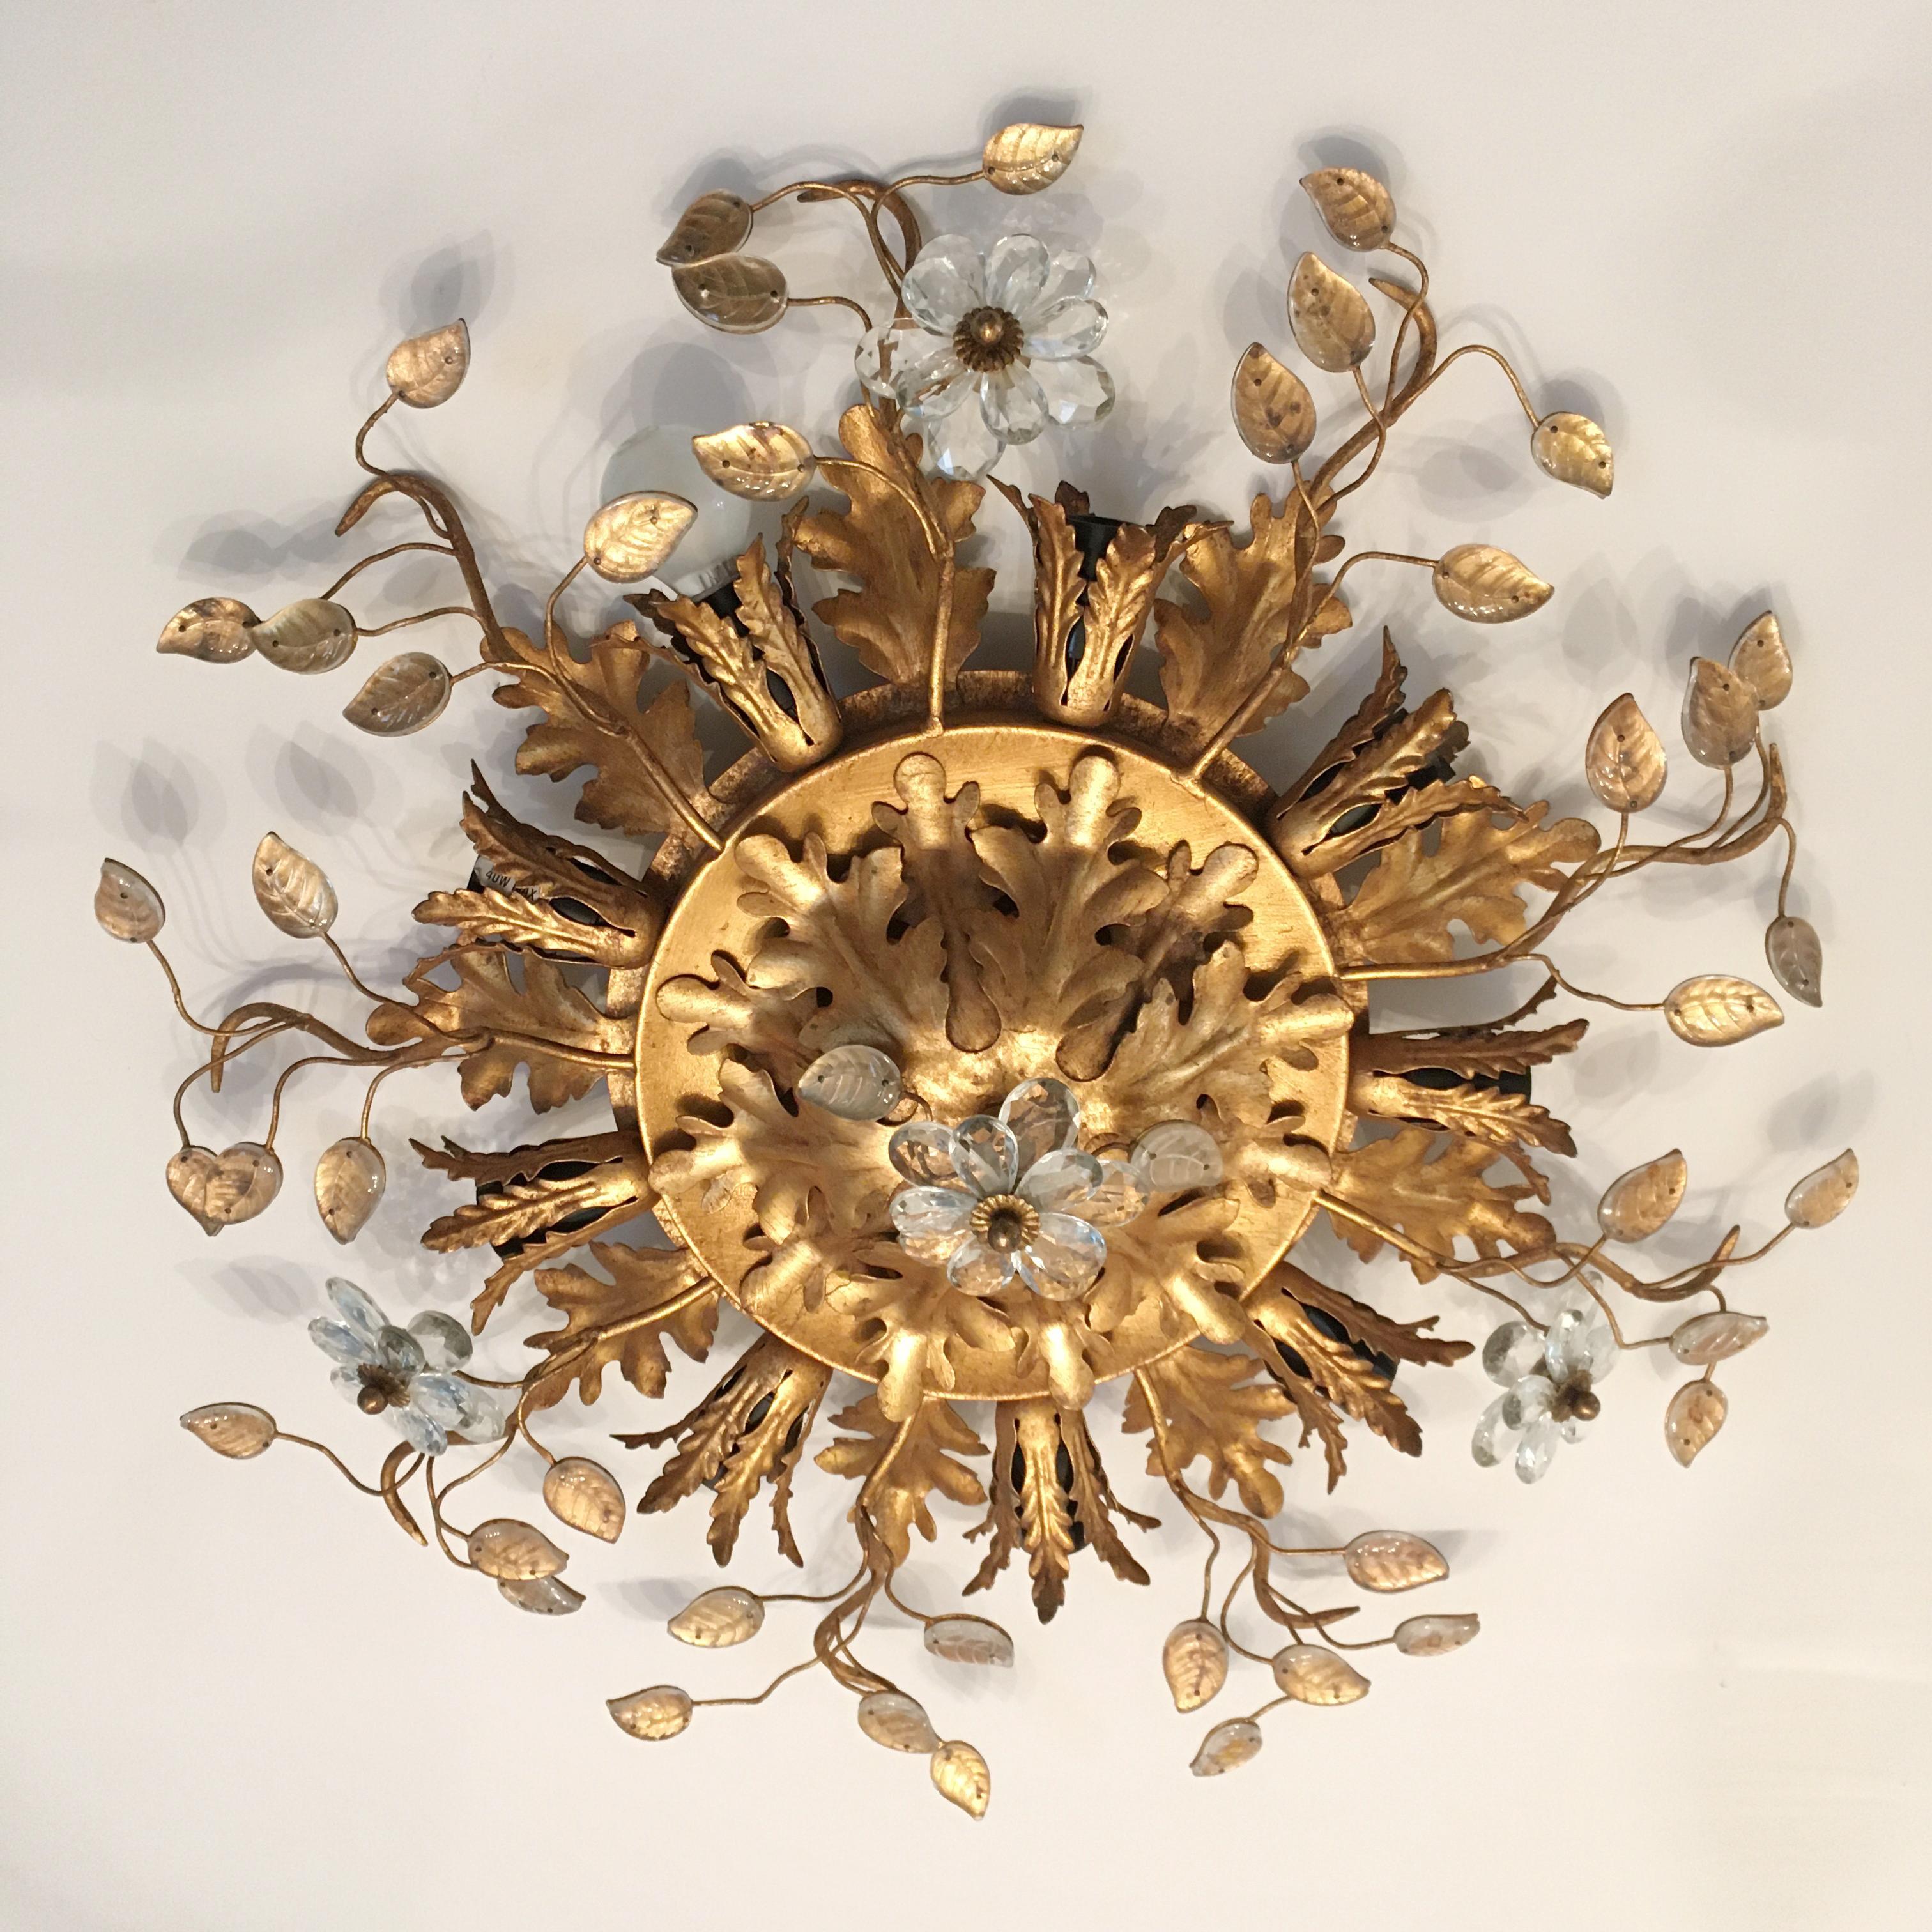 Italian Florentine flush mount ceiling light
Beautiful gilt acanthus leaf flush light, with winding gilt stems, clear Murano glass flowers and clear/pale gold Murano glass leaves
Banci Firenze, Italy,
Measures: 60cm width
15cm depth (protrusion